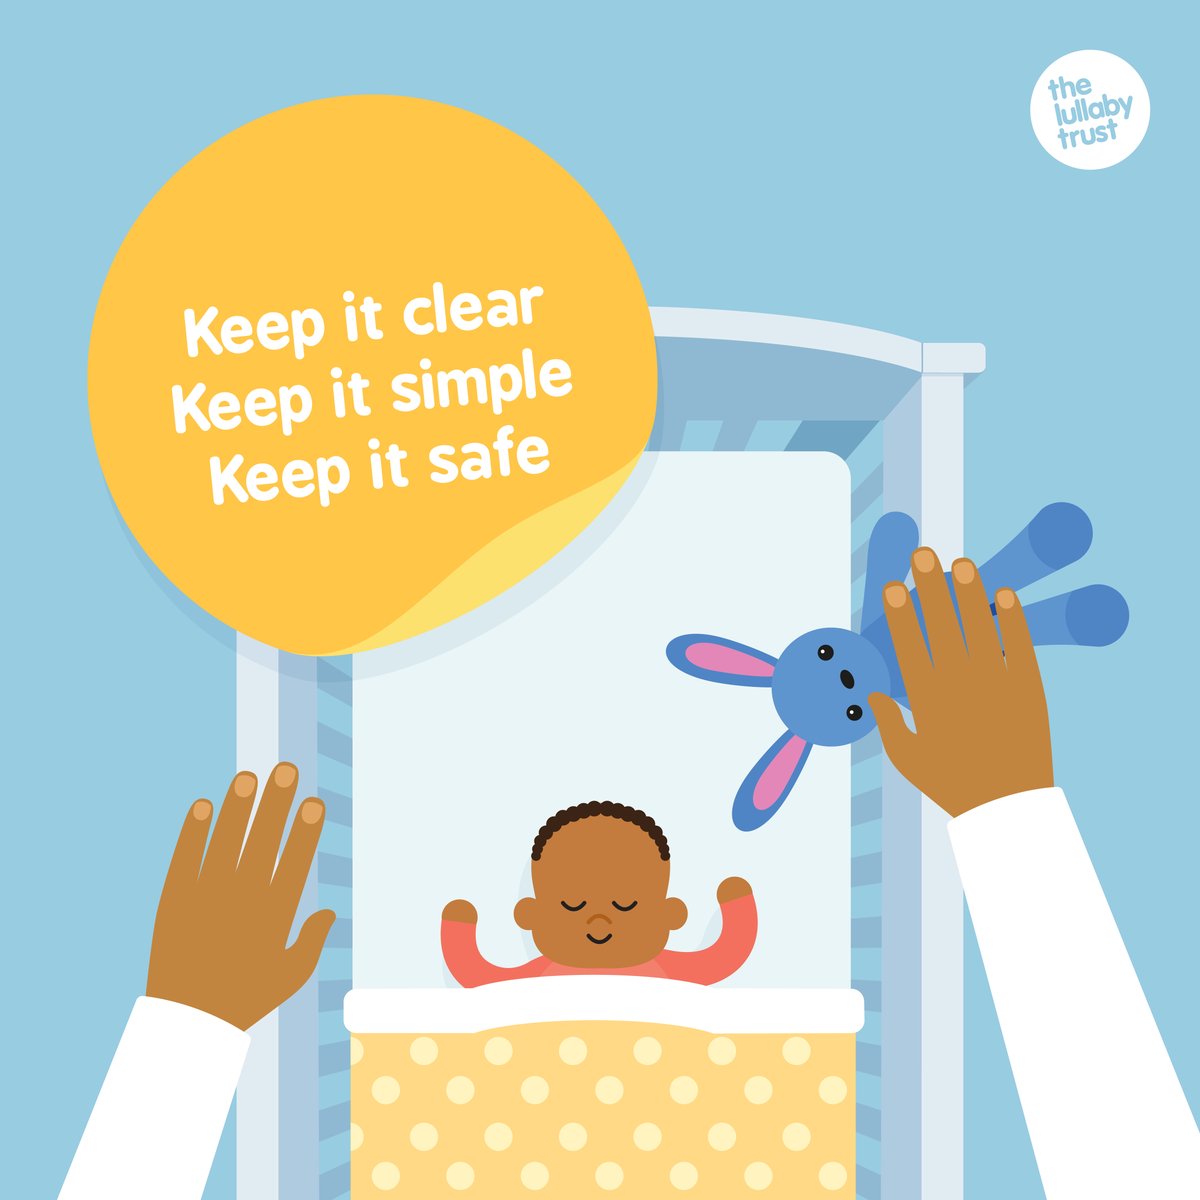 It is much safer to have a clear cot than a cute cot. Extra items in the cot could cover baby’s head, block their airways, or make them overheat, increasing the SIDS risk. Remove all non-essential items from. 
-
👉🏿 Keep it clear 
👉🏿 Keep it simple 
👉🏿 Keep it safe 
-
#SaferSleep